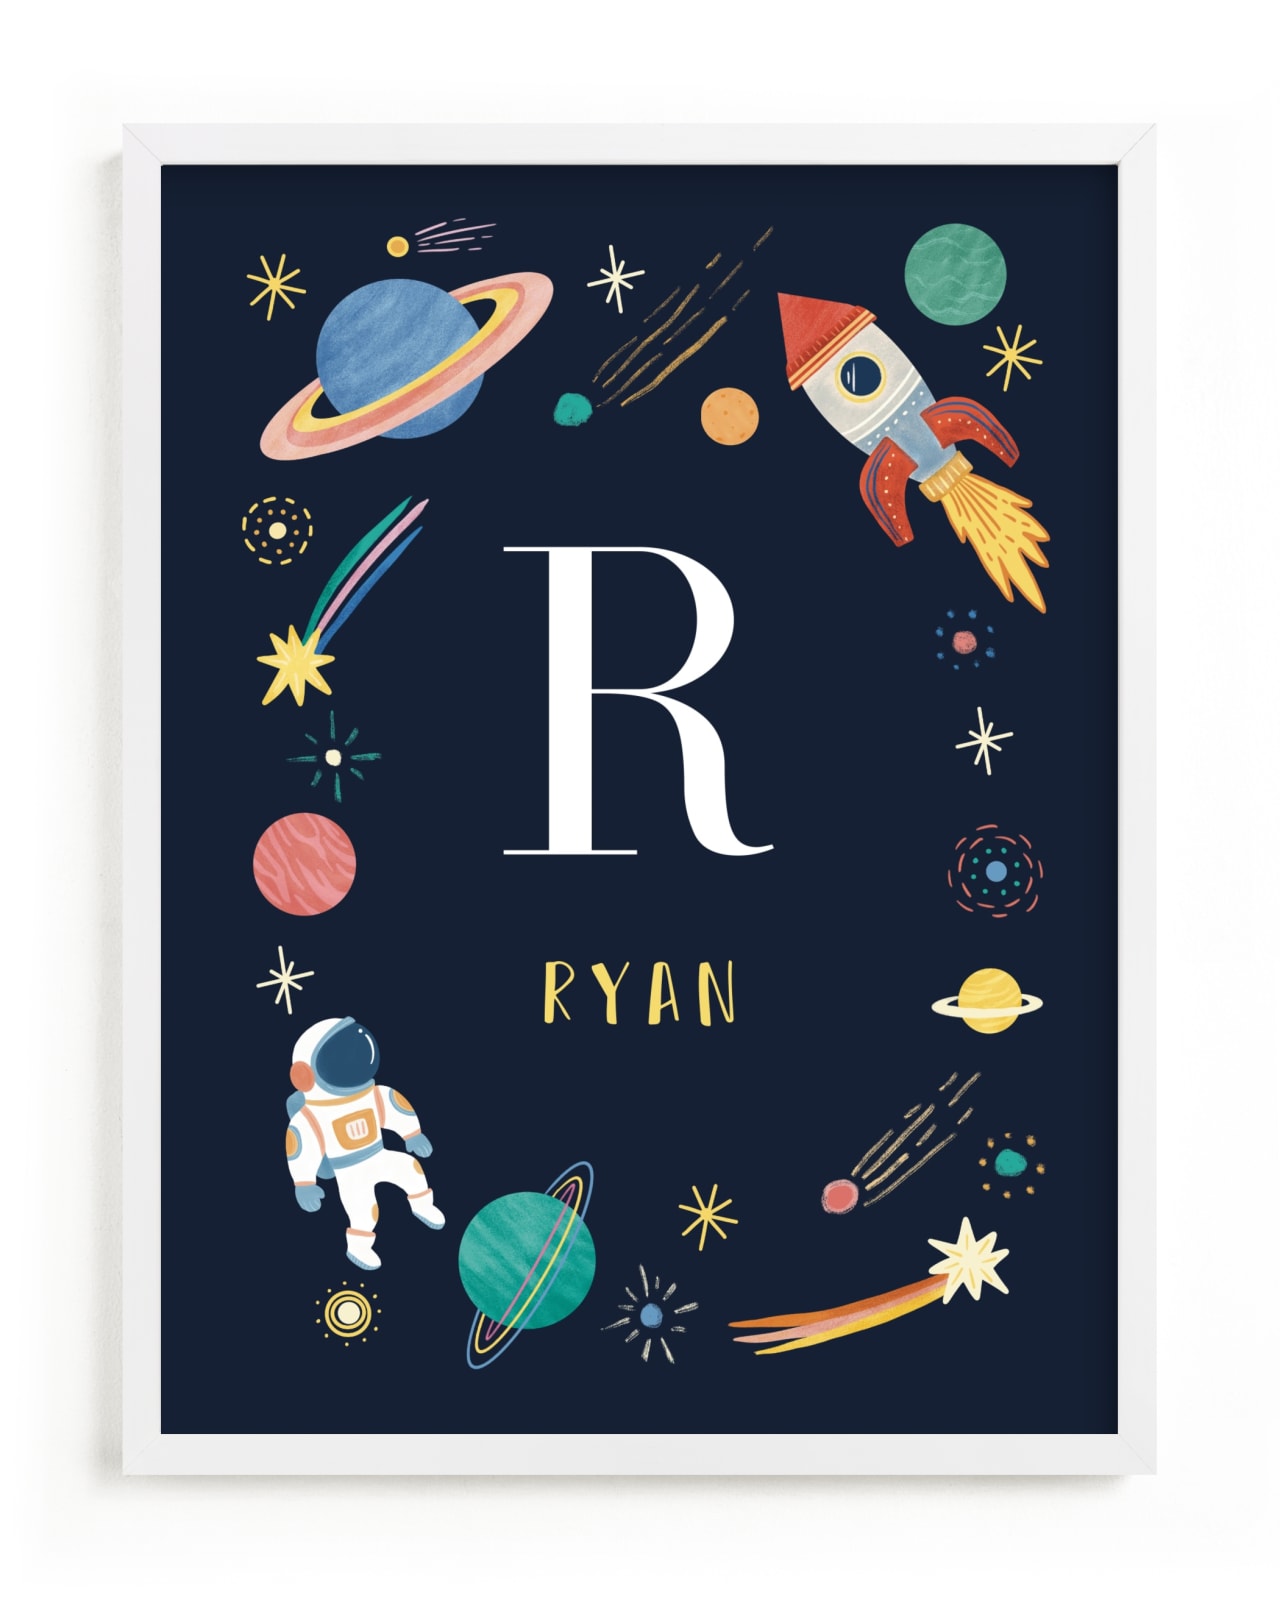 Spaceships, stars, moons, and planets surrounding the first letter of a name, with the full name below